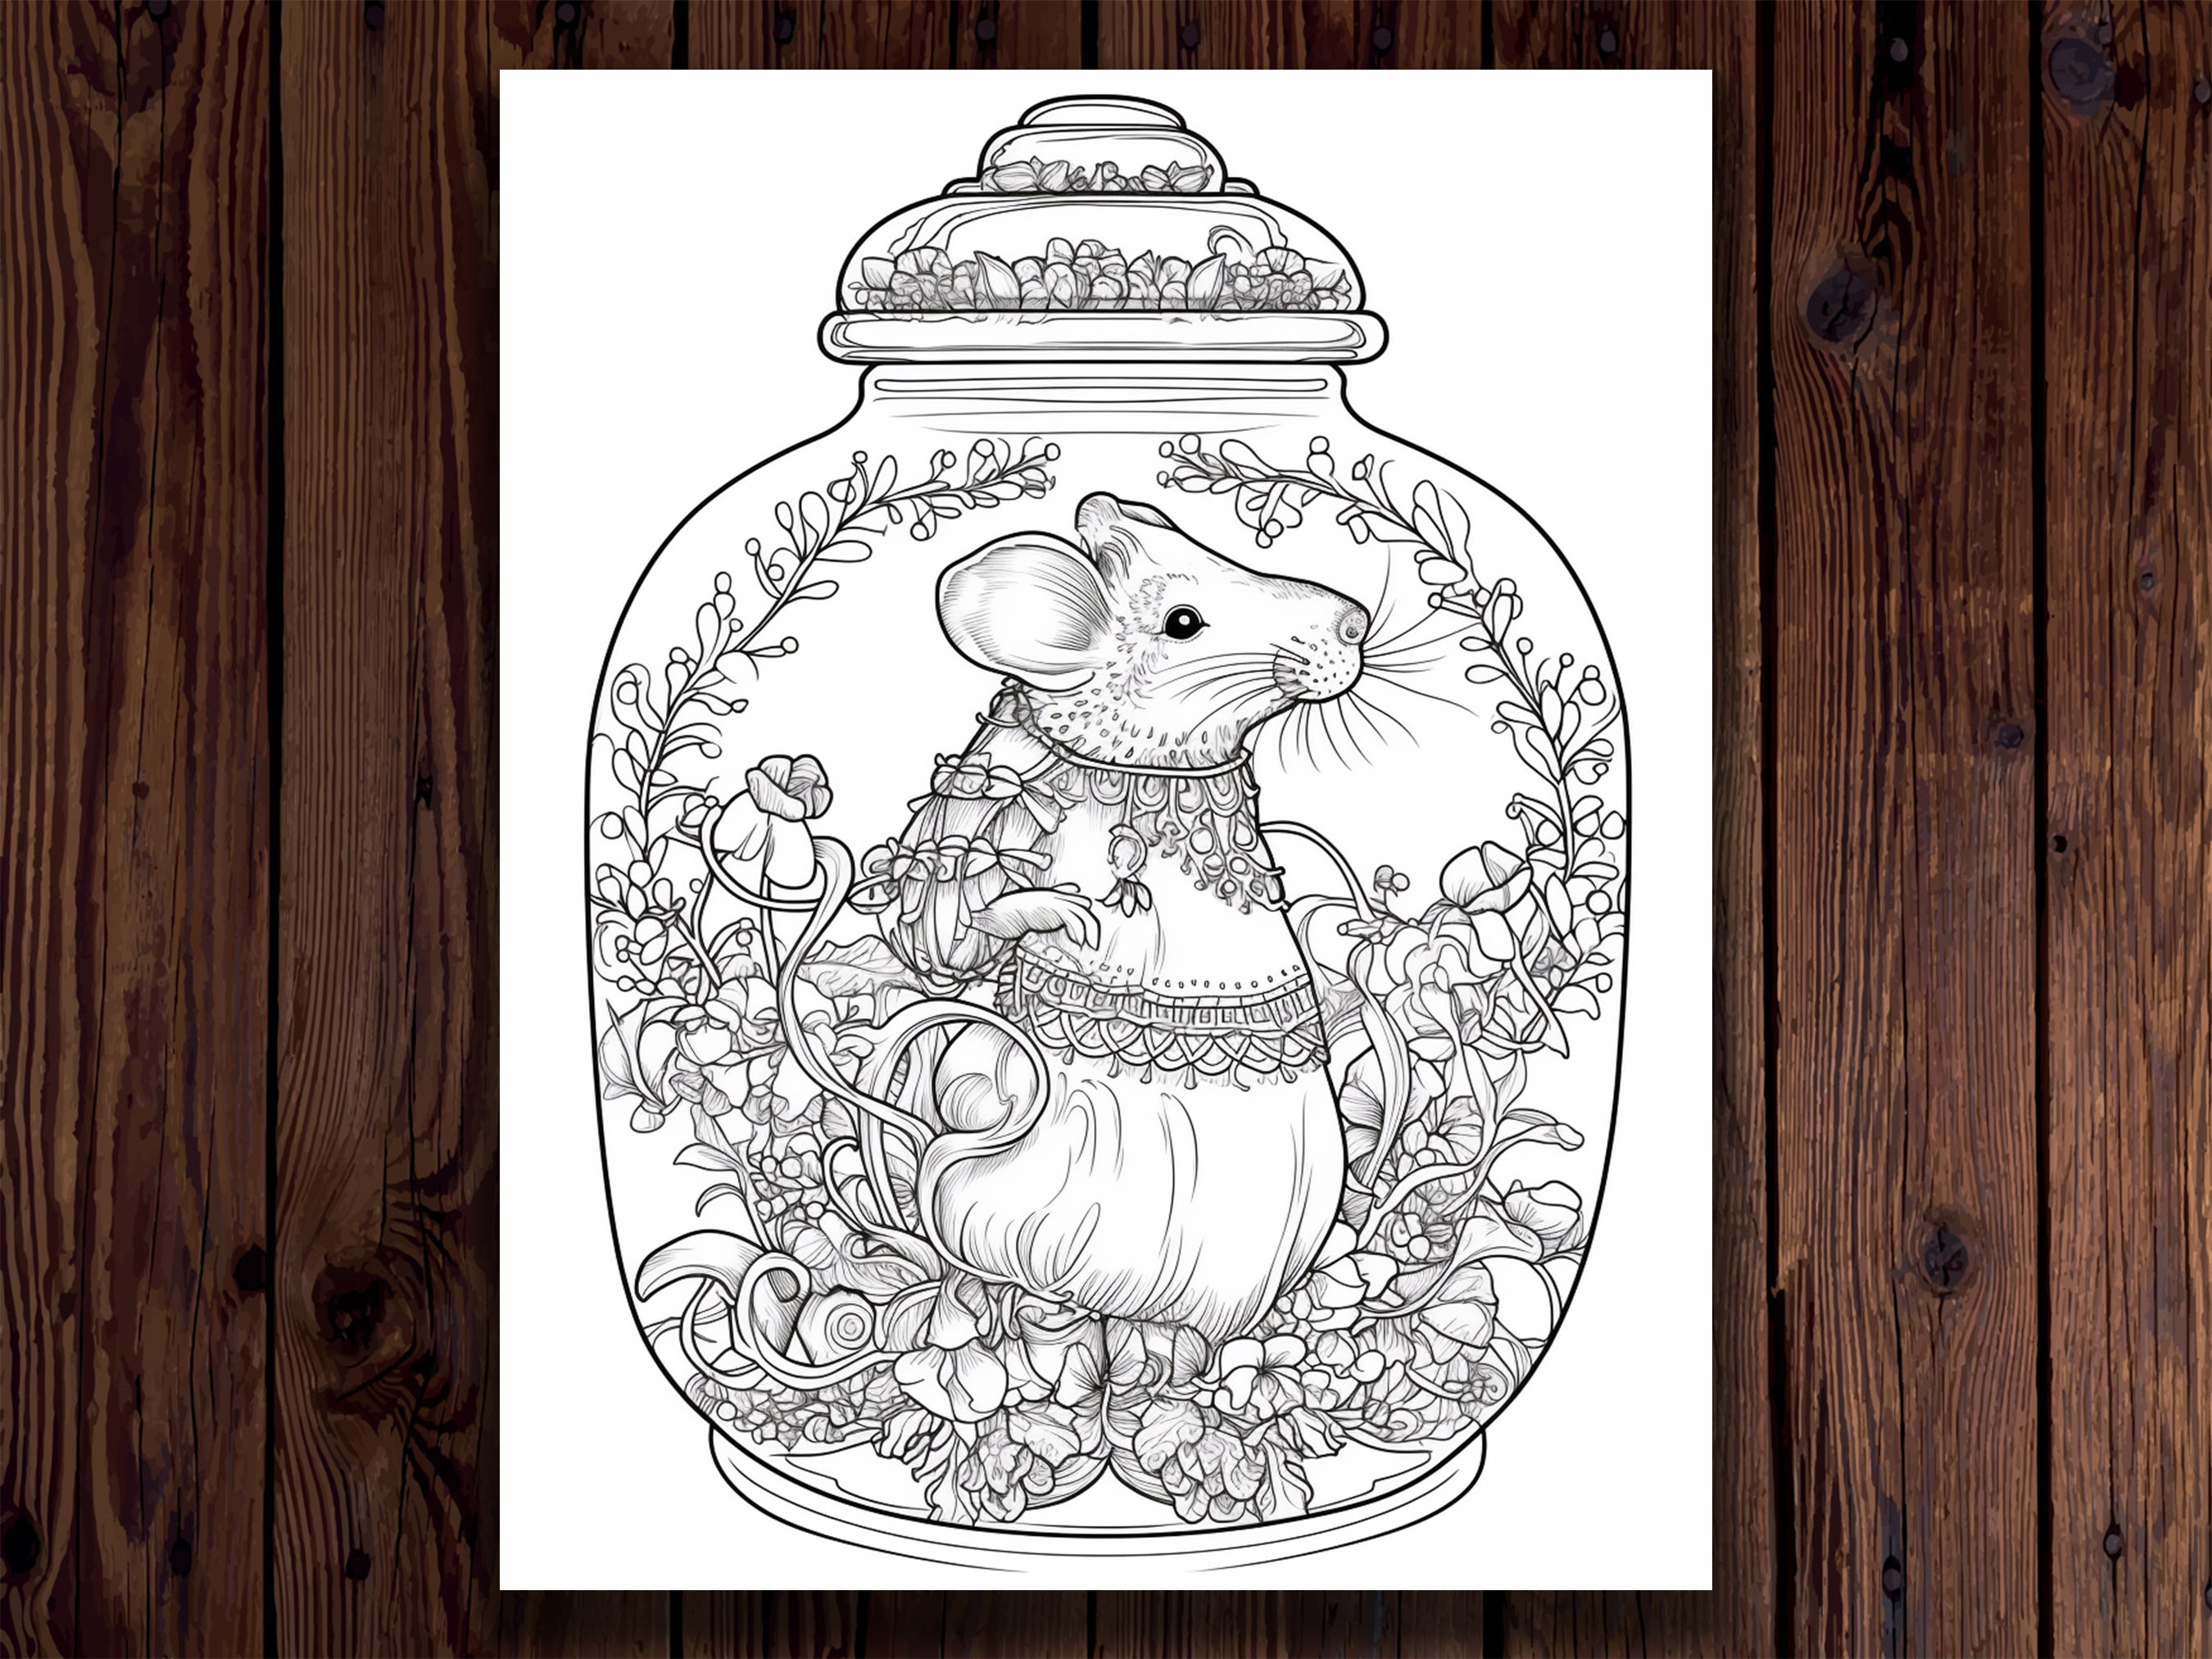 Enchanting Magic Jar Coloring Book: 50 Fun Designs coloring pages, adult  coloring books for anxiety and depression, VOL9 by Med publish